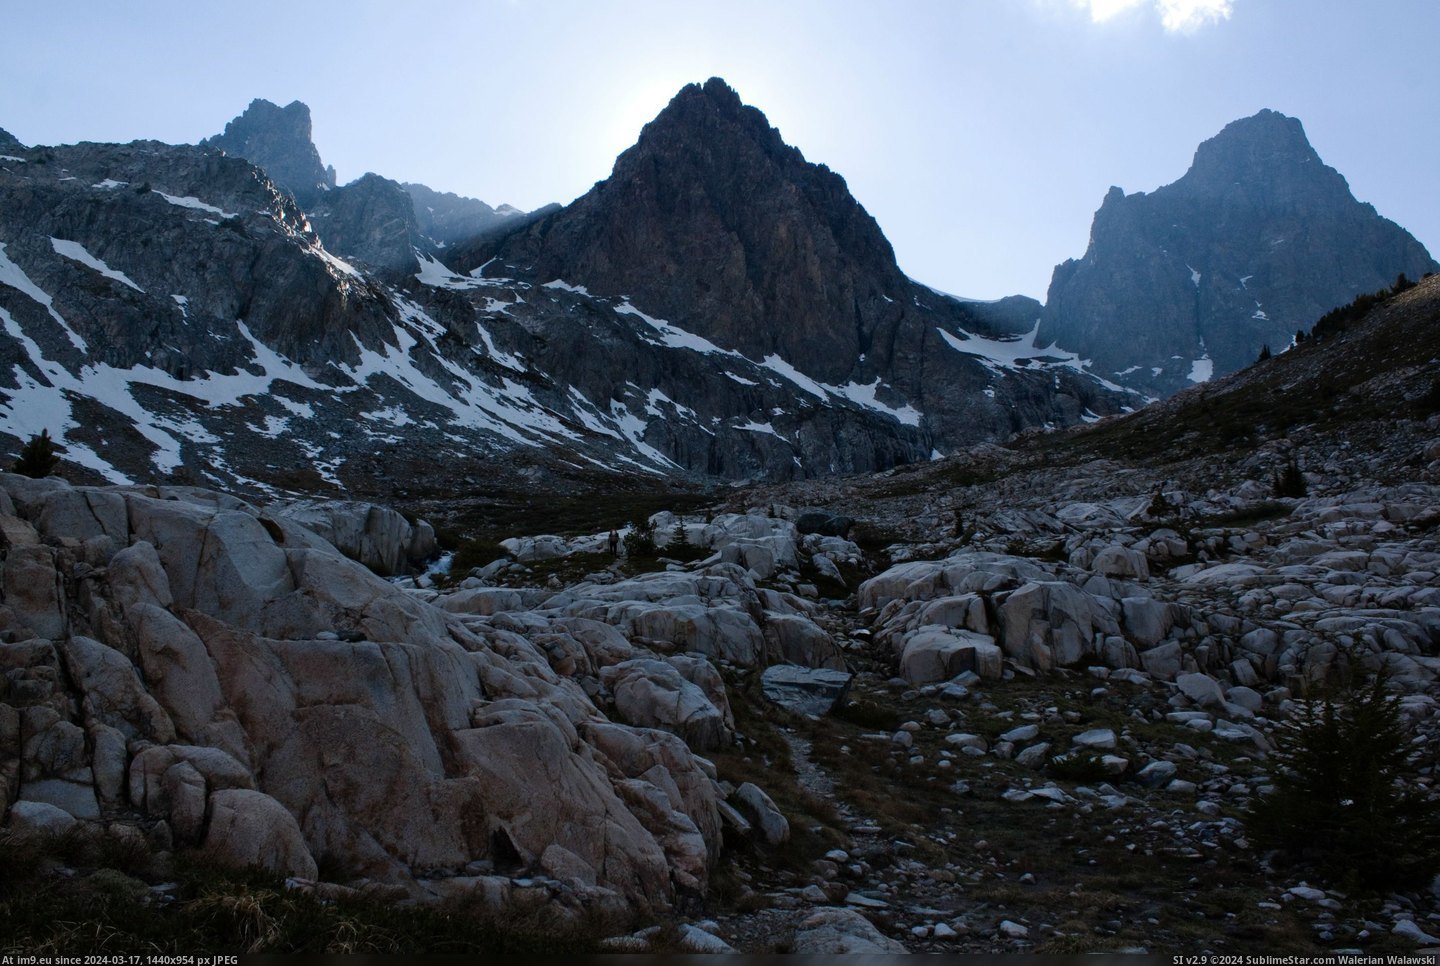 #Banner #Peak #Ritter #Camp #Mammoth [Earthporn] Ritter and Banner Peak from Camp, Mammoth CA [2851x1900] Pic. (Изображение из альбом My r/EARTHPORN favs))